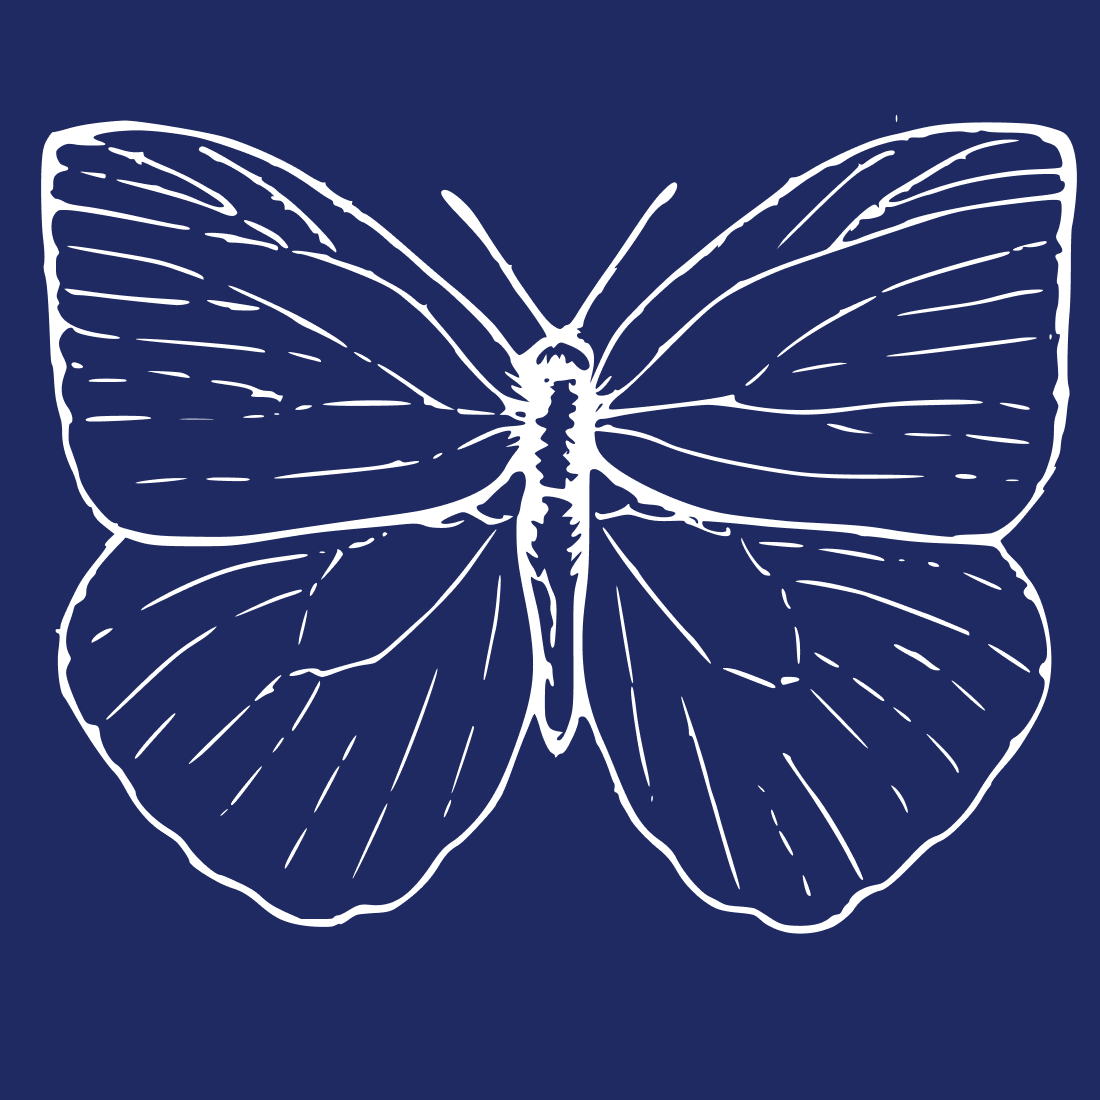 Bug Sketch Insect Butterfly Wildlife SVG cover image.